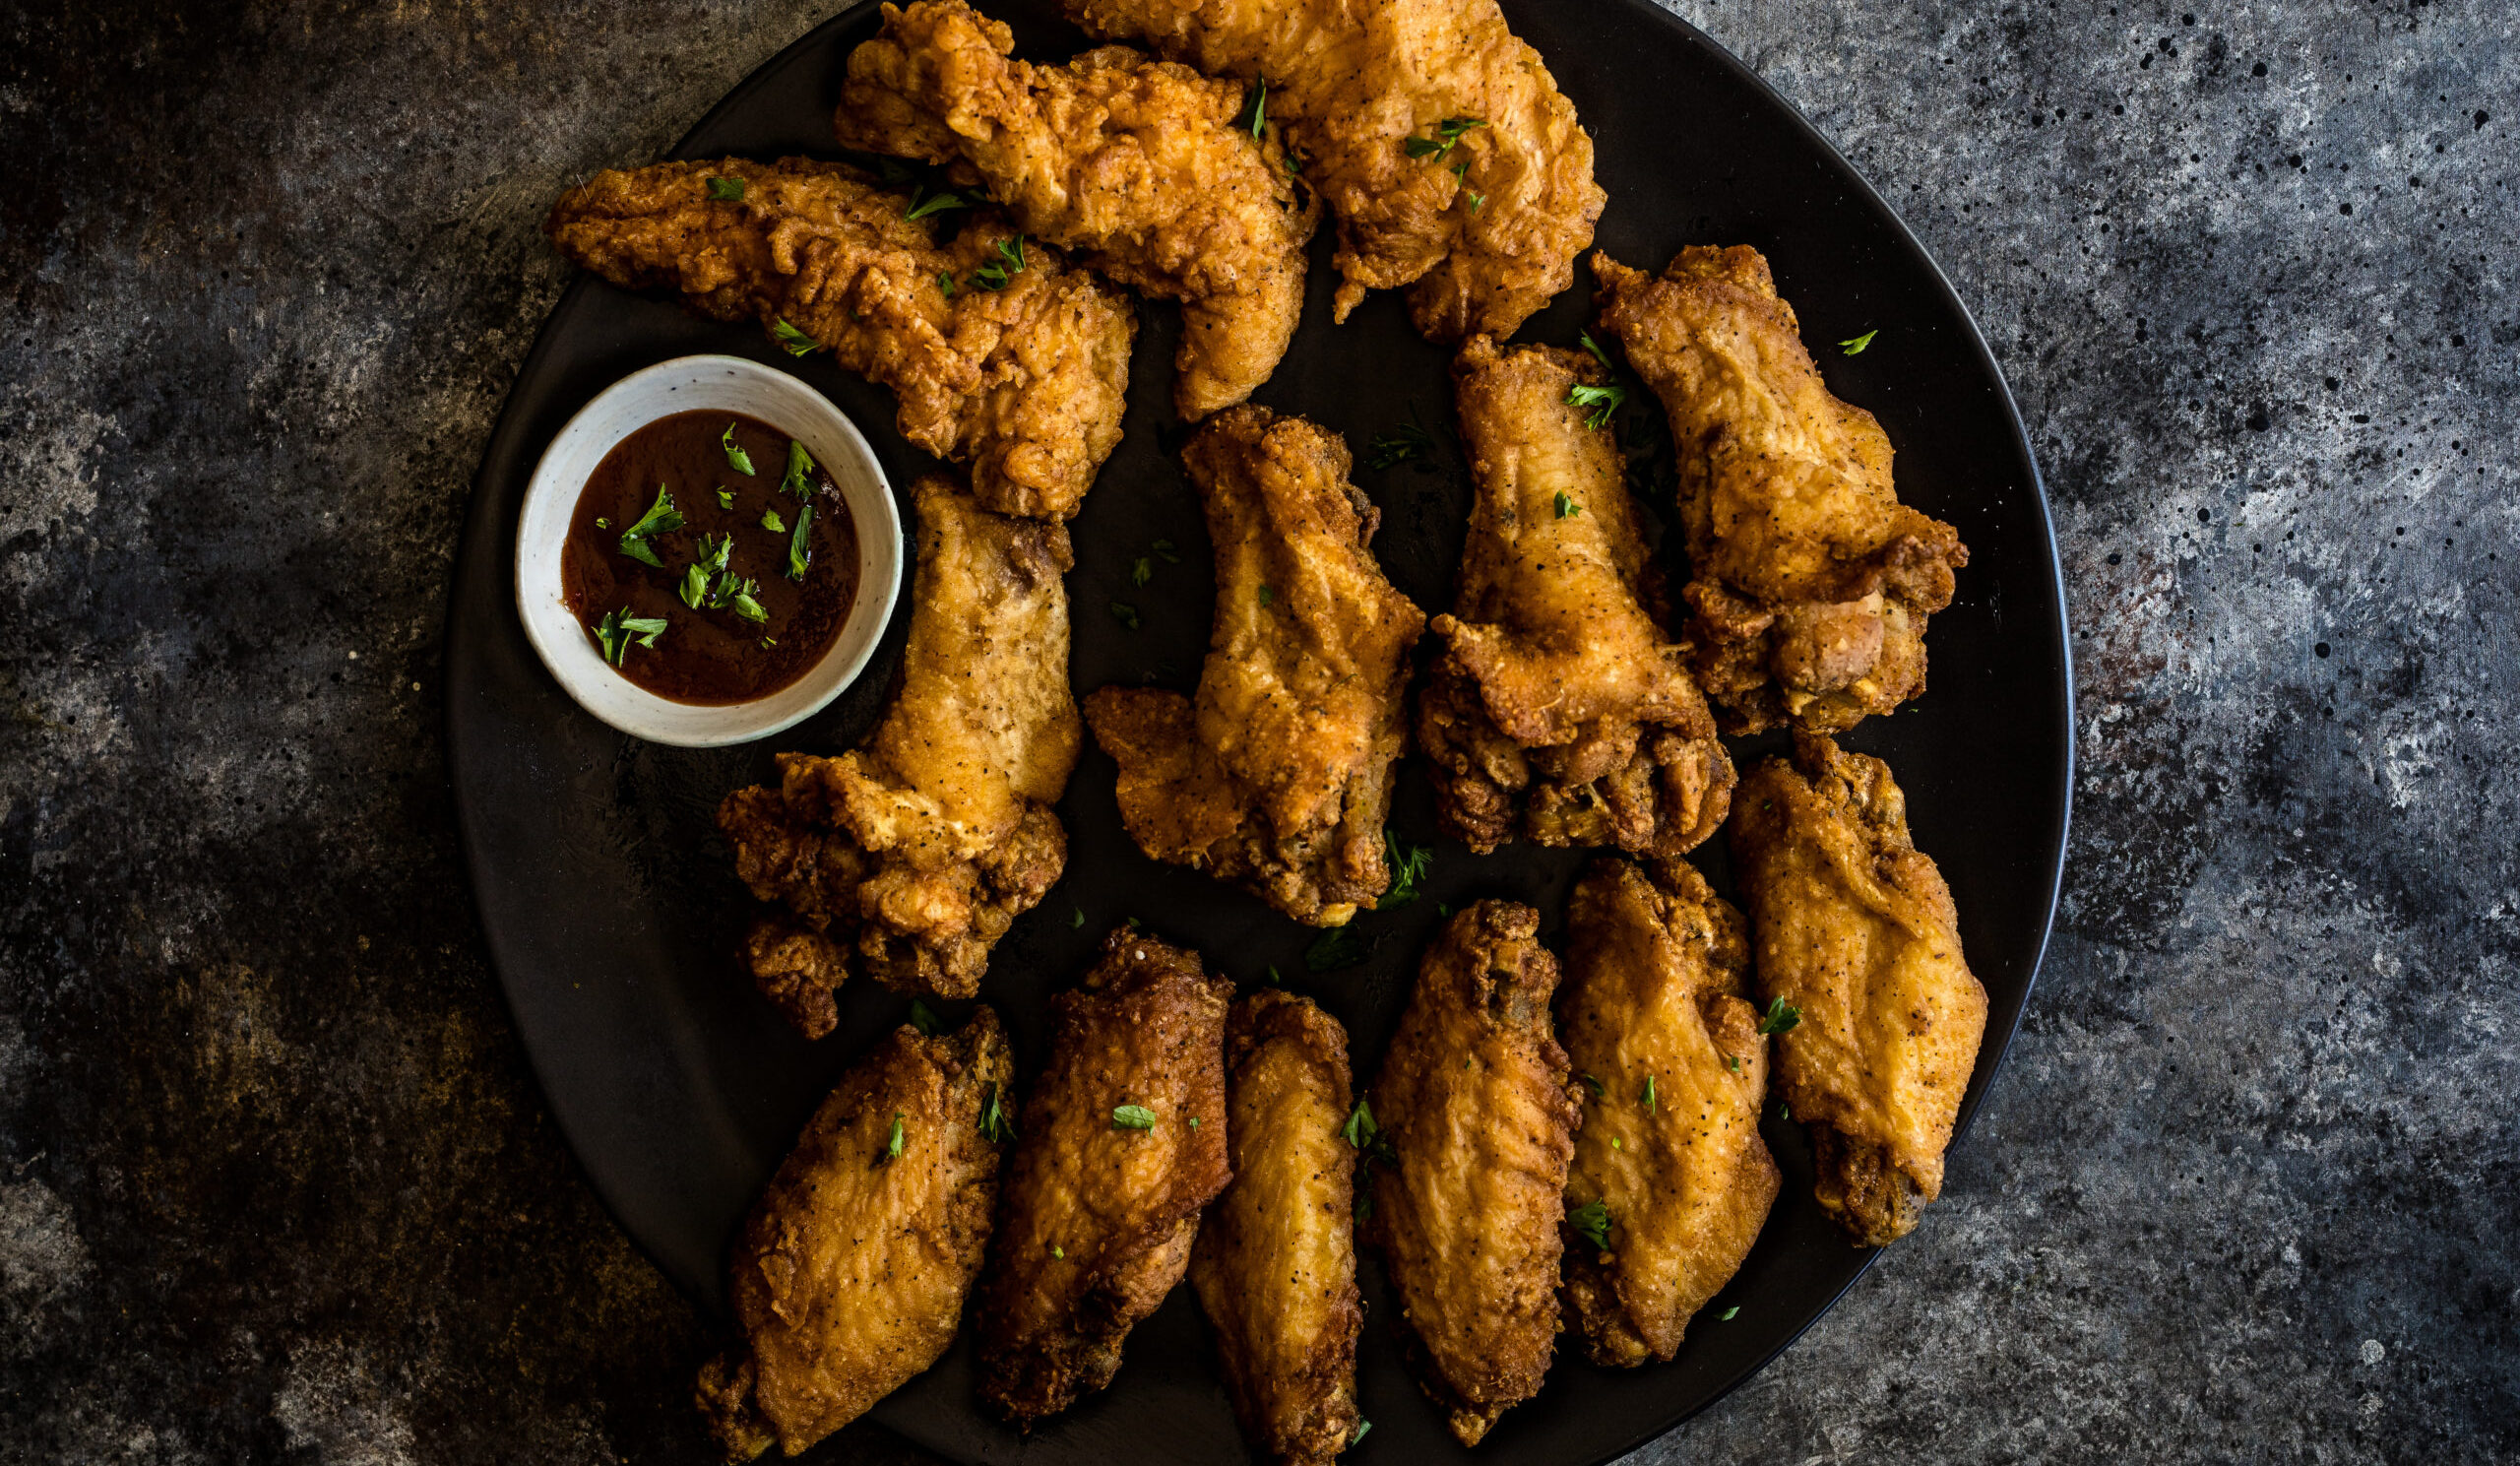 a plate of fried chicken wings on grey counter